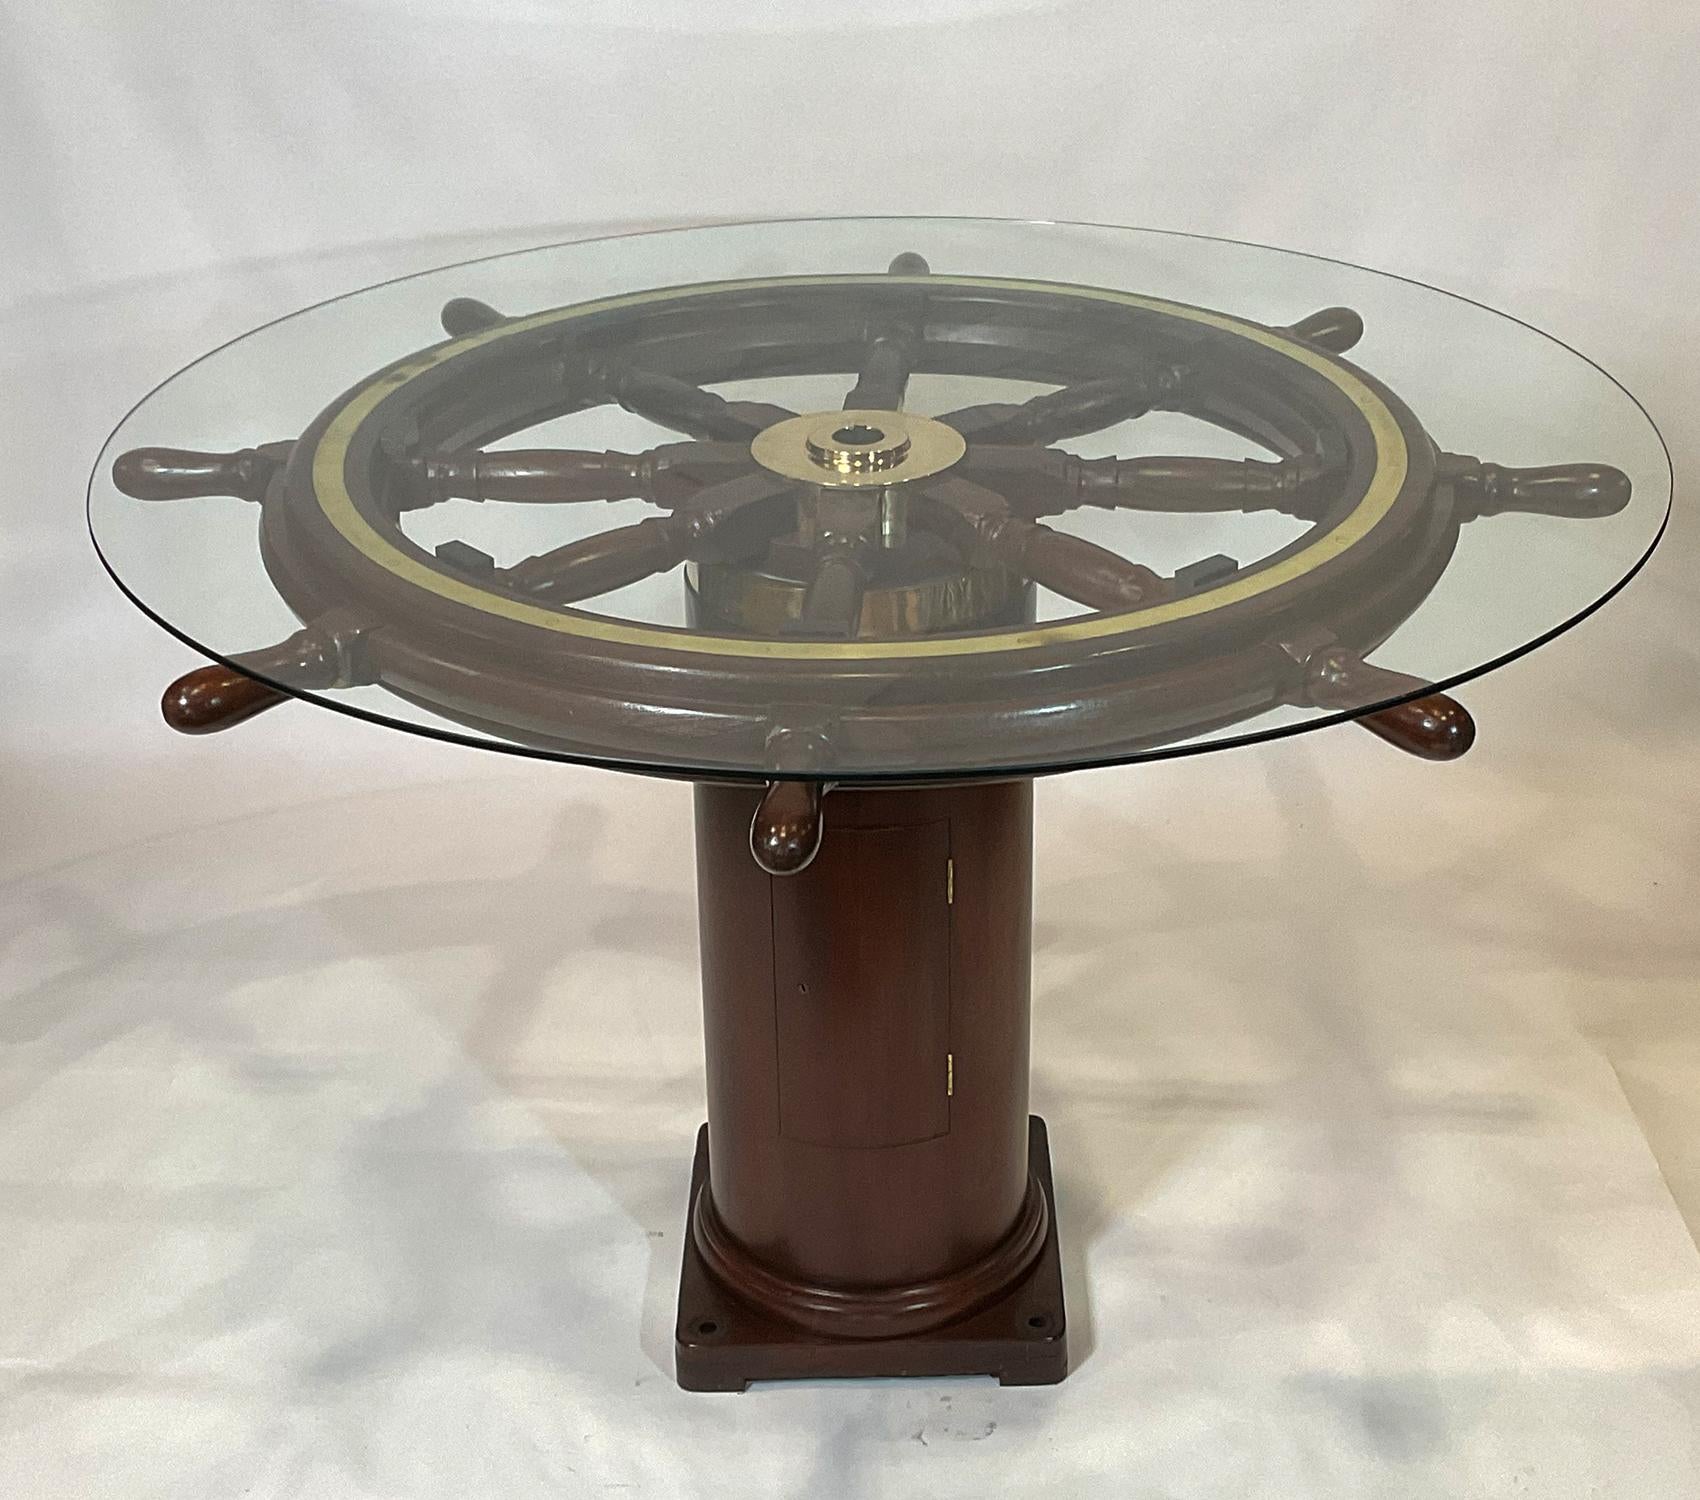 Fabulous antique ships wheel that has been fitted to a ships binnacle base creating a custom bar height dining table. This has a sixty-inch half inch tempered glass top. The eight-spoke wheel has been expertly refinished and is fitted with a highly